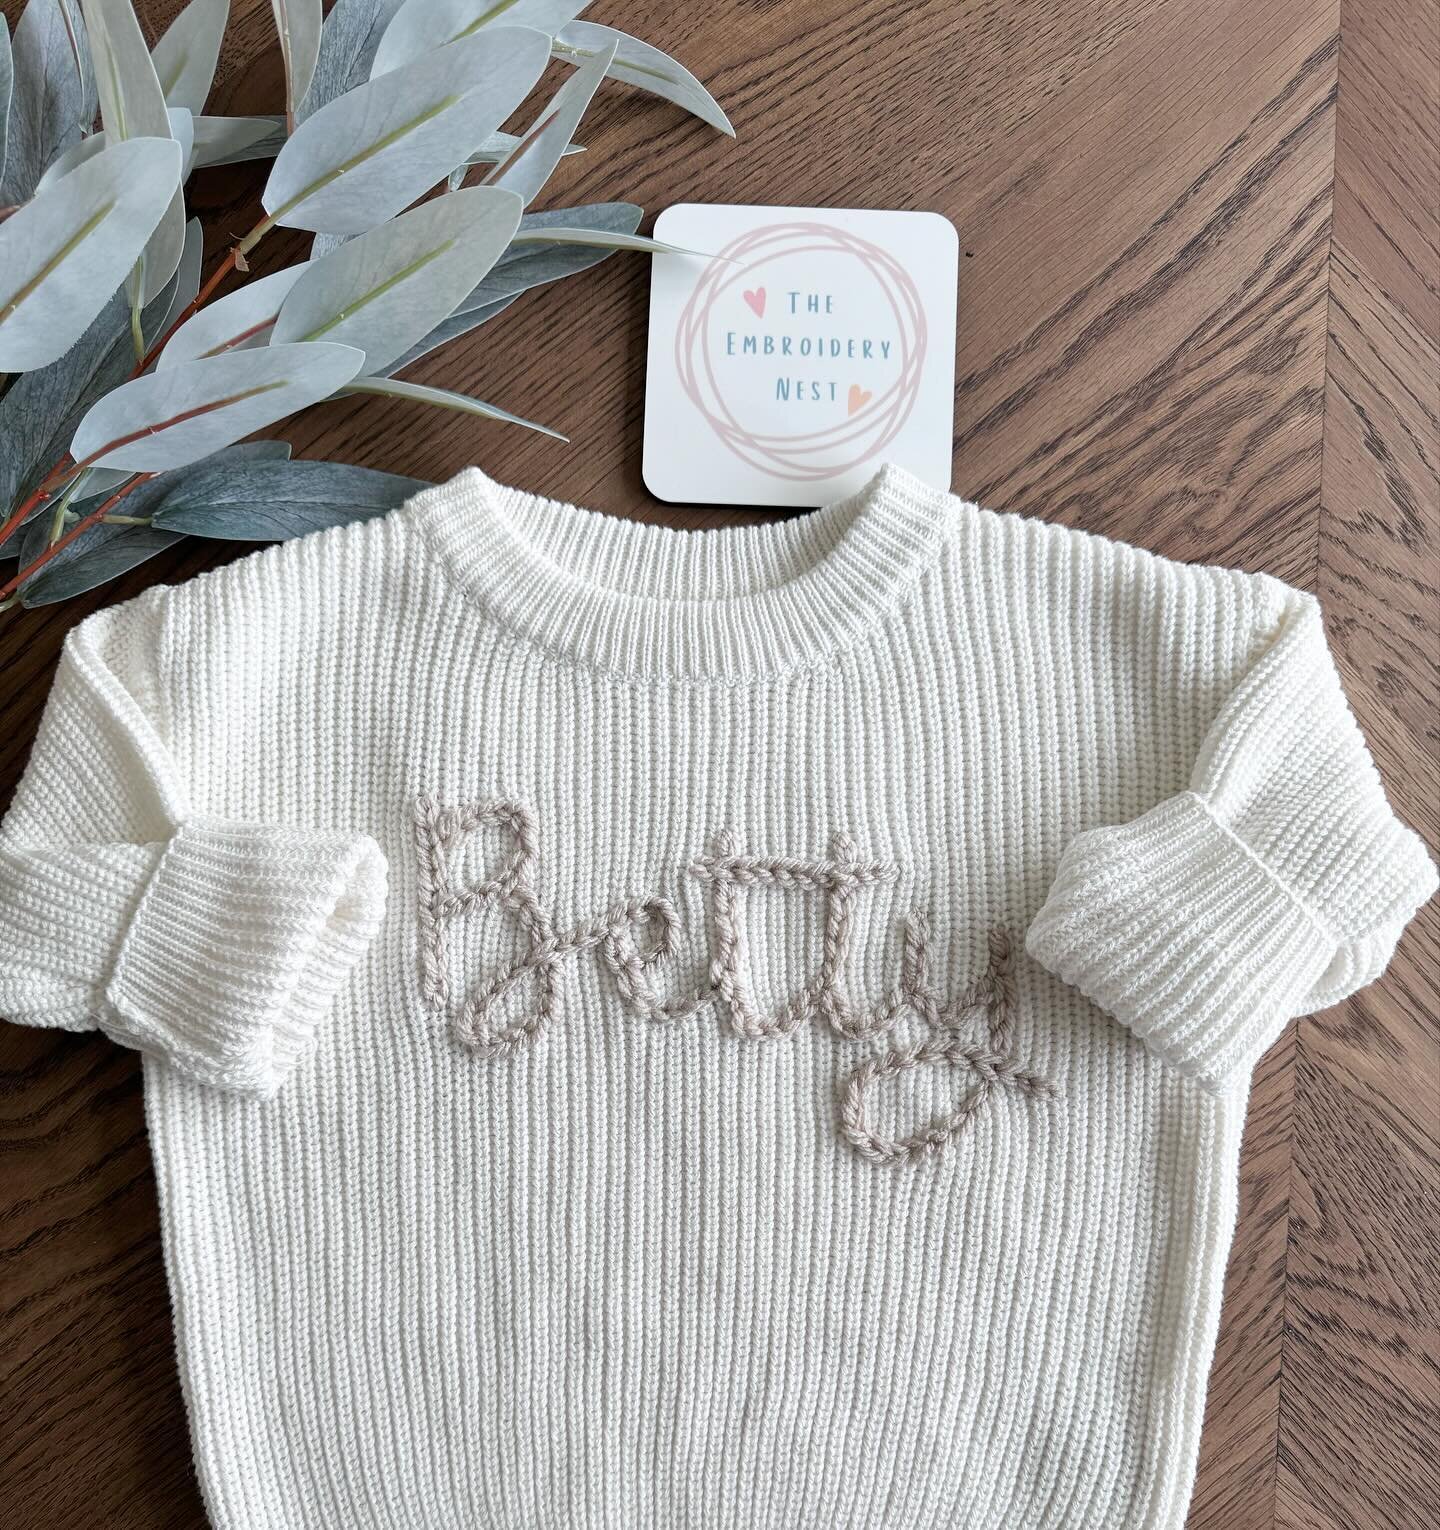 The first part of this sweet sweater is complete. Cream sweater with natural yarn. Look out for part 2 🐝&hellip; 

#babyannouncement #babygift #babynames #babynamesuggestions #babynamesweater #babyshowergift #babysweater #customnamesweater #customsw